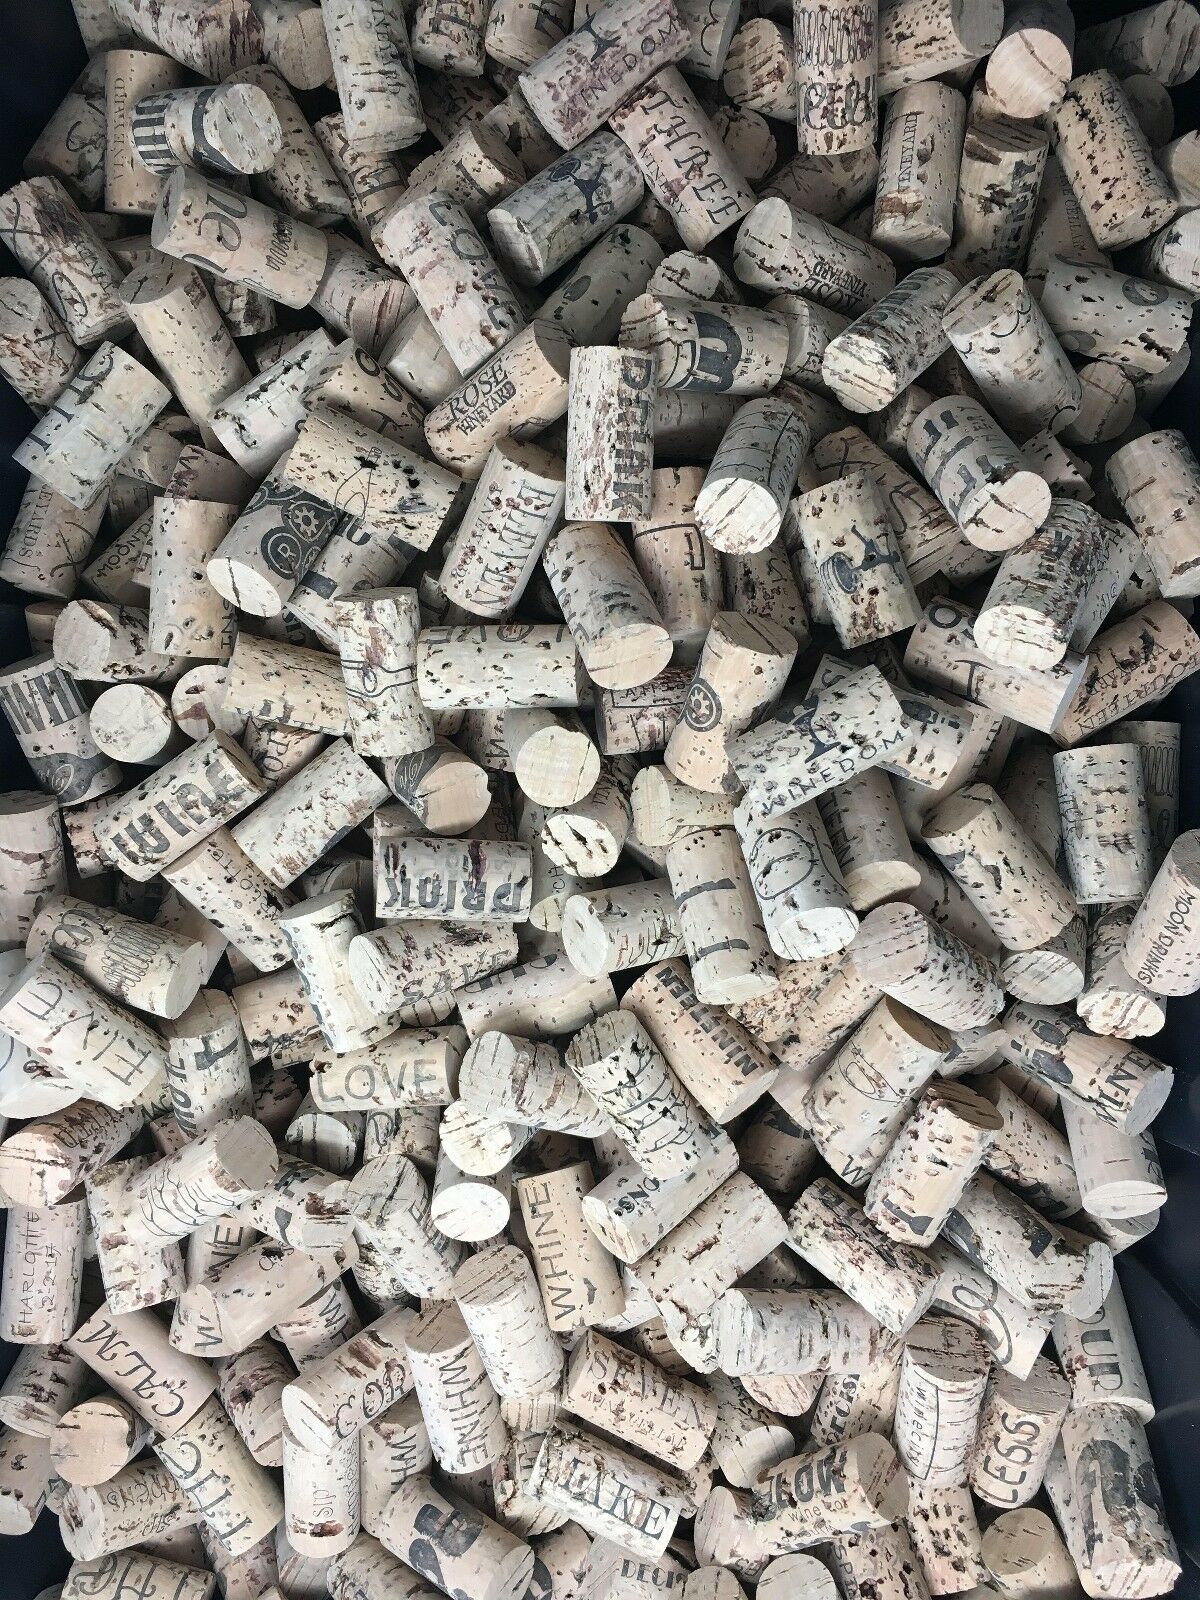 New Wine Corks For Crafting. All Natural, Printed Mark For Arts, Crafts, Decor.